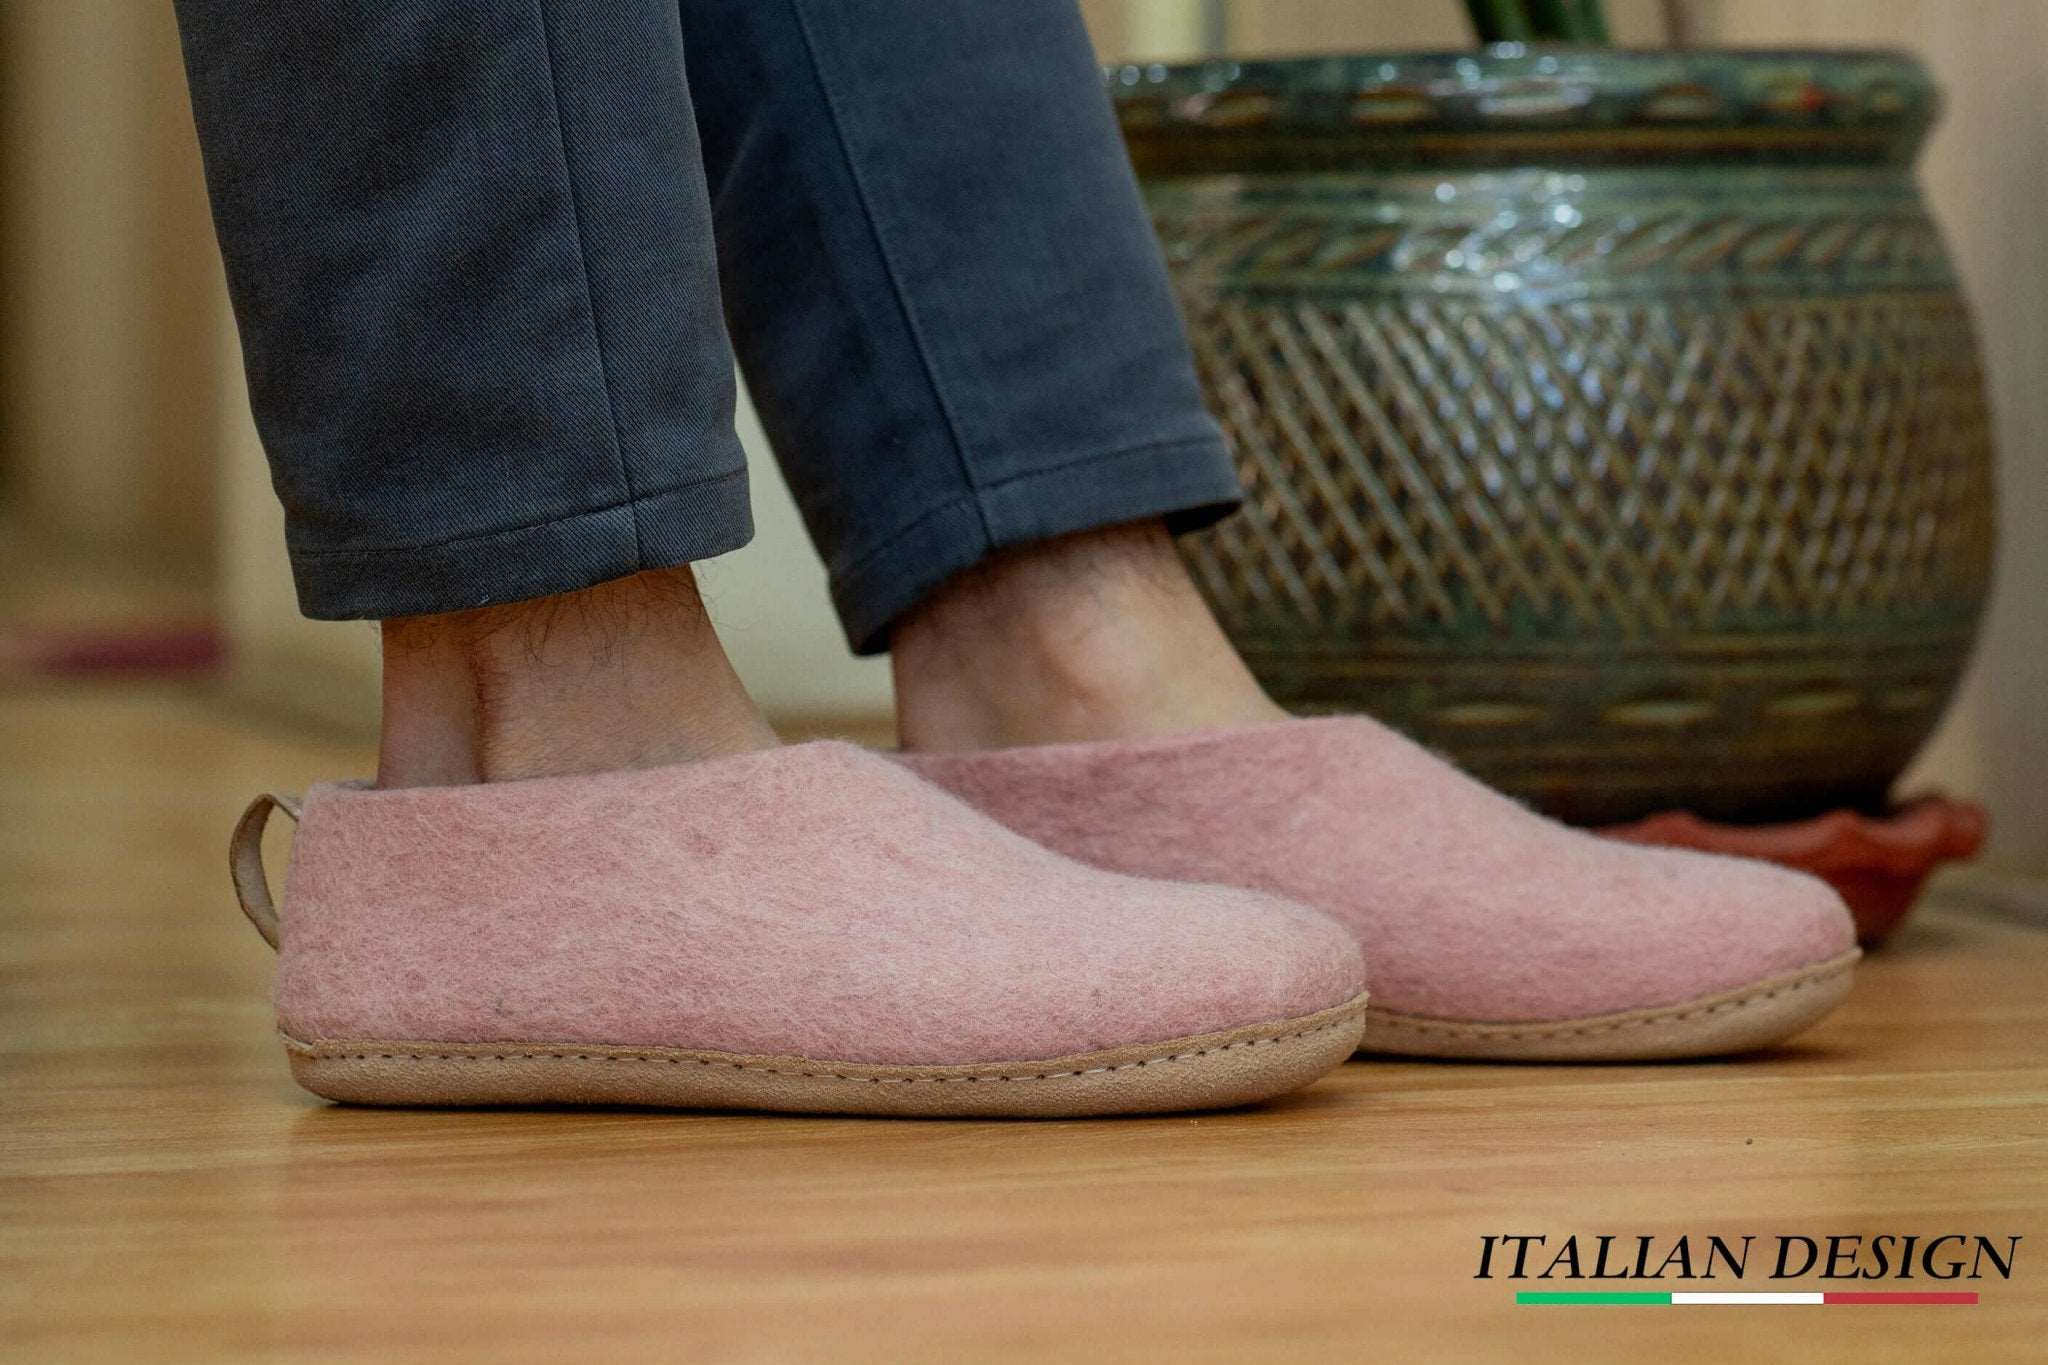 Indoor Shoes With Leather Sole - Baby Pink - Woollyes